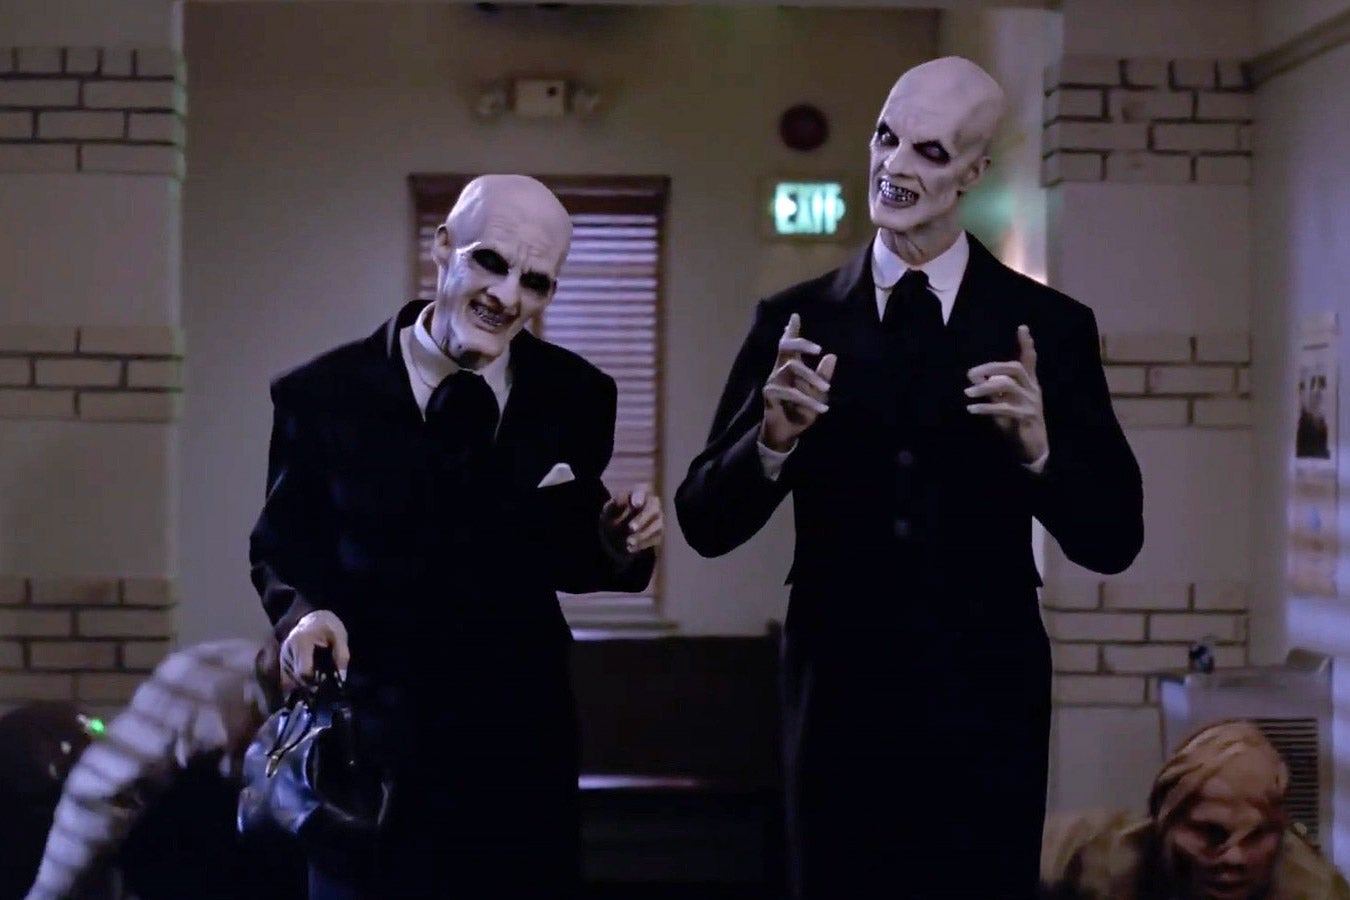 Two vampire-looking monsters bare their teeth and wear suits.